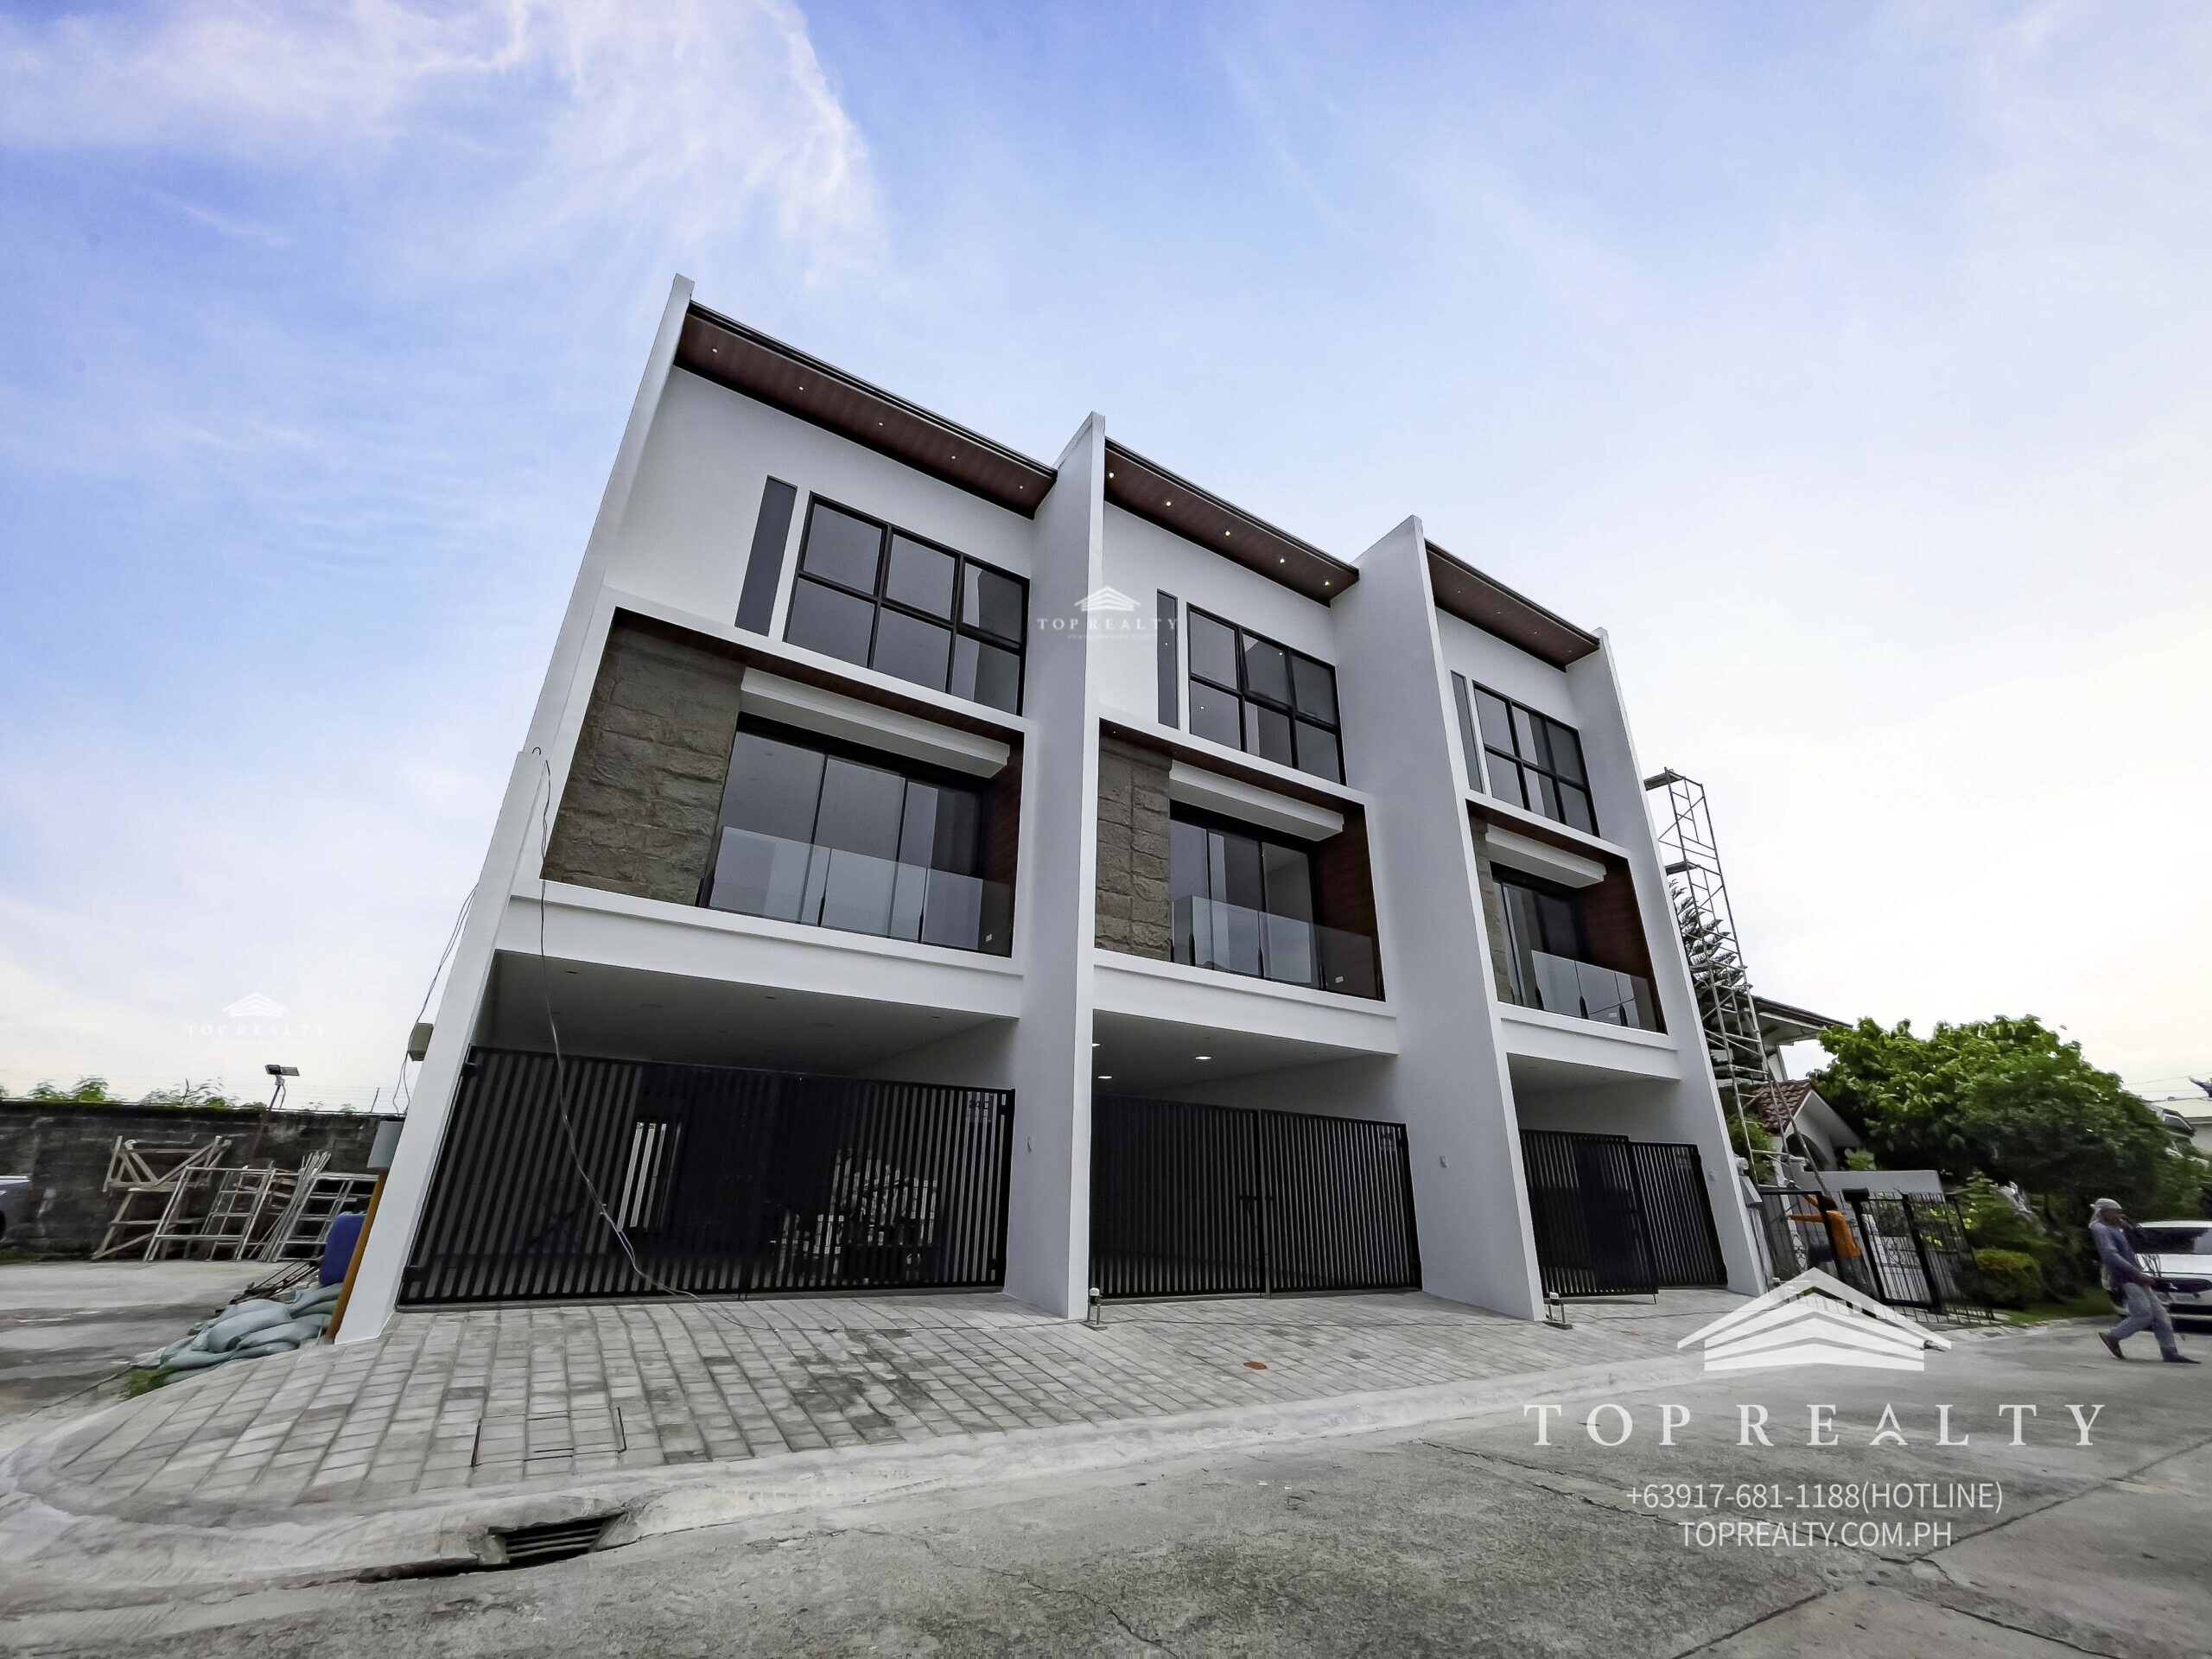 https://toprealty.com.ph/wp-content/uploads/2022/12/facade-2-scaled.jpg